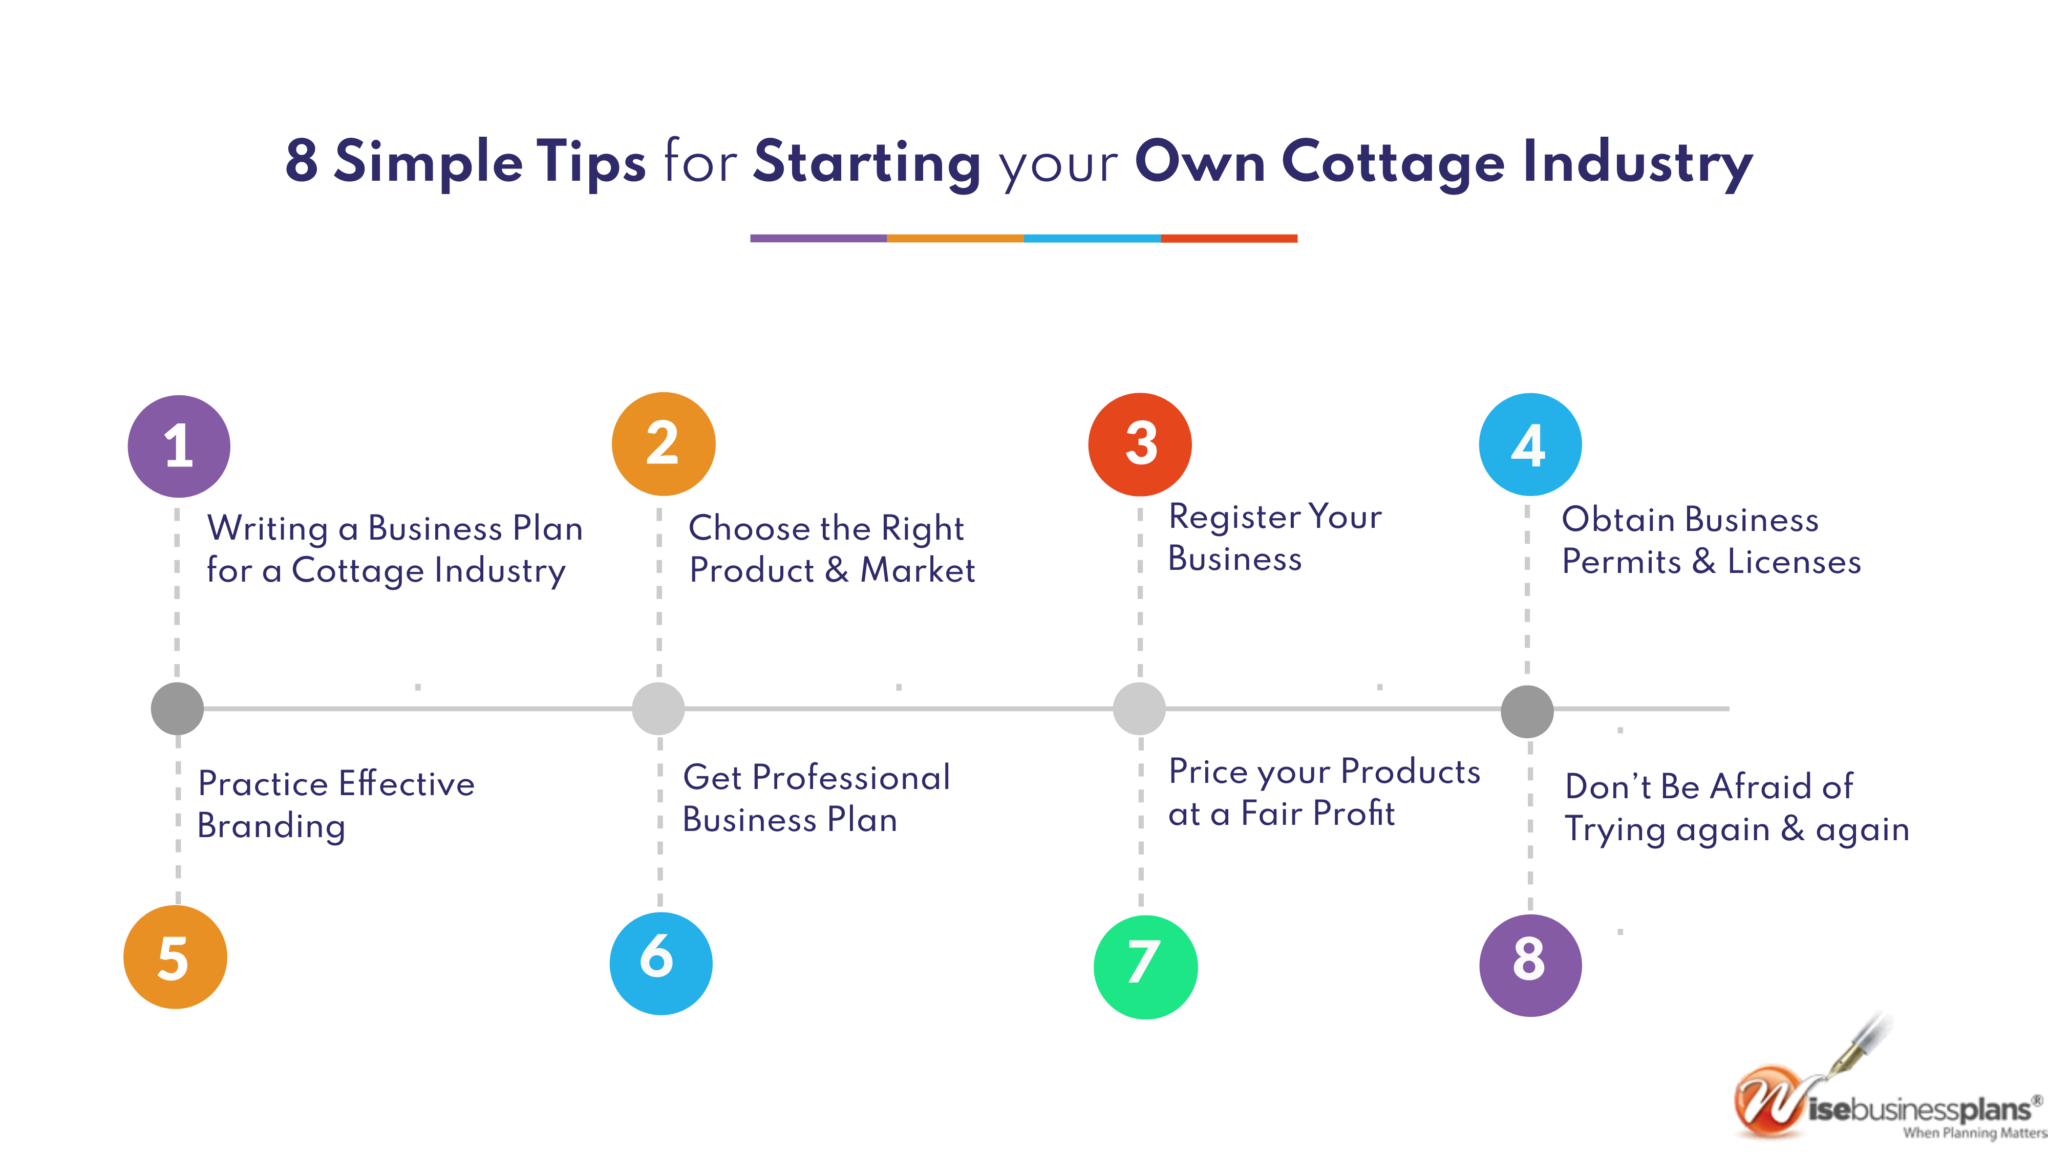 Tips for starting your own cottage industry business